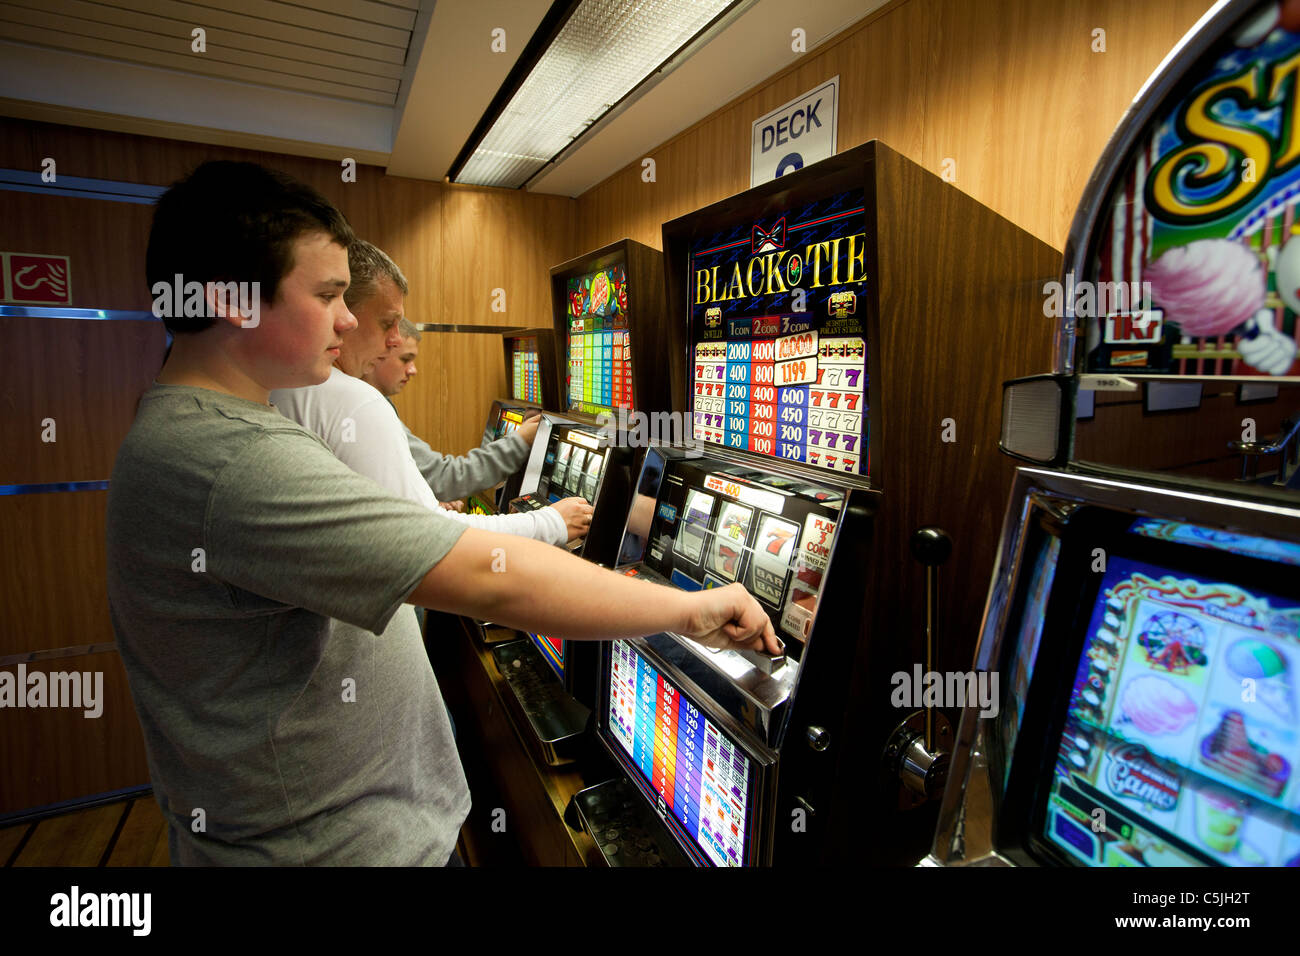 People play on slot machines Stock Photo